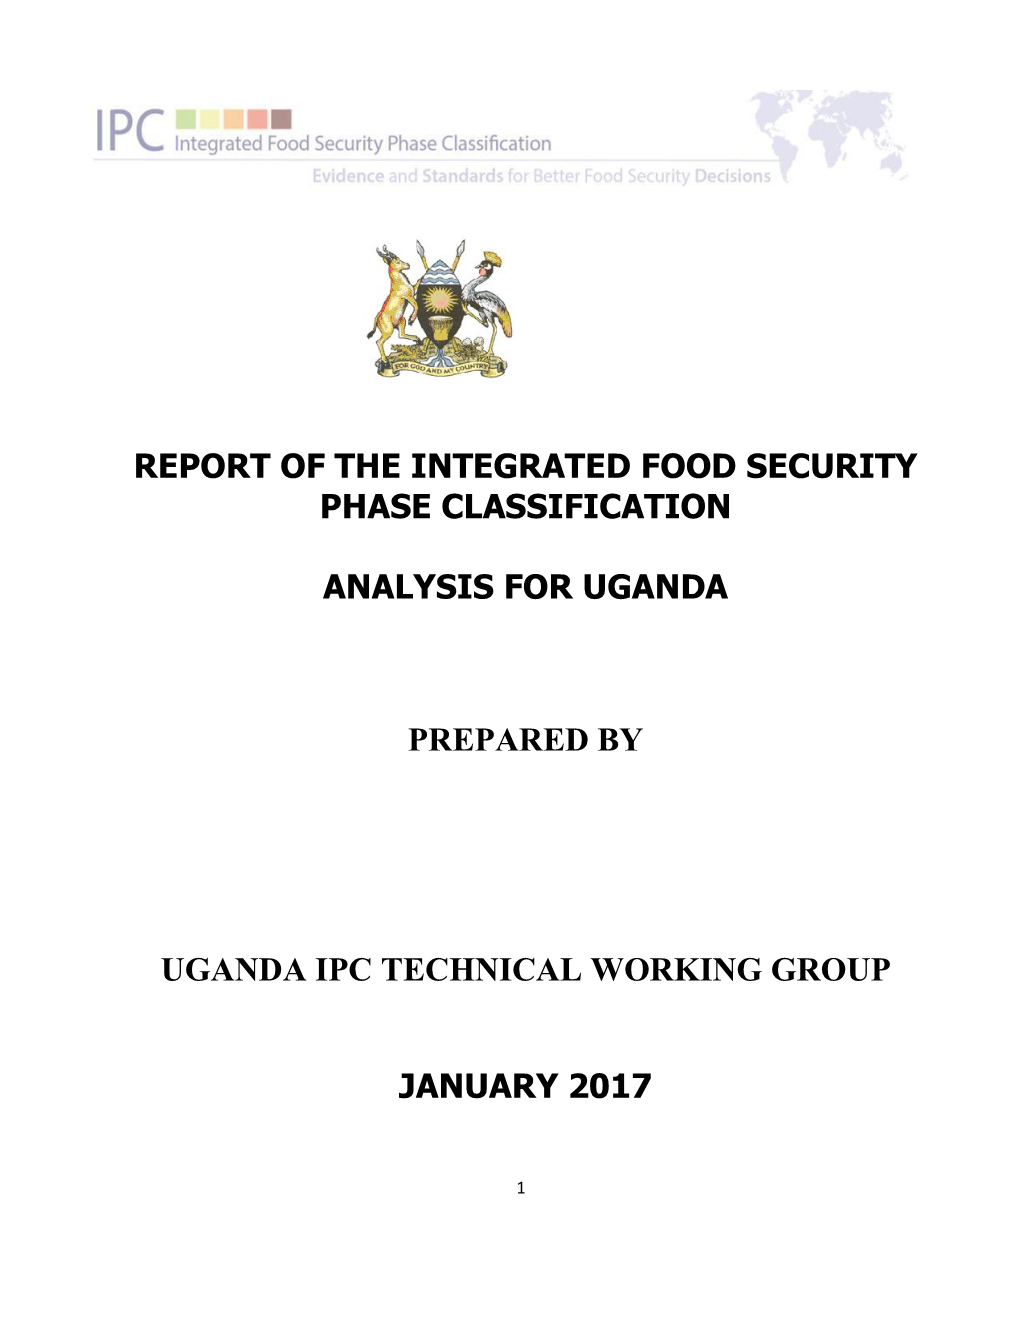 2. Integrated Food Security Phase Classification Analysis Report For